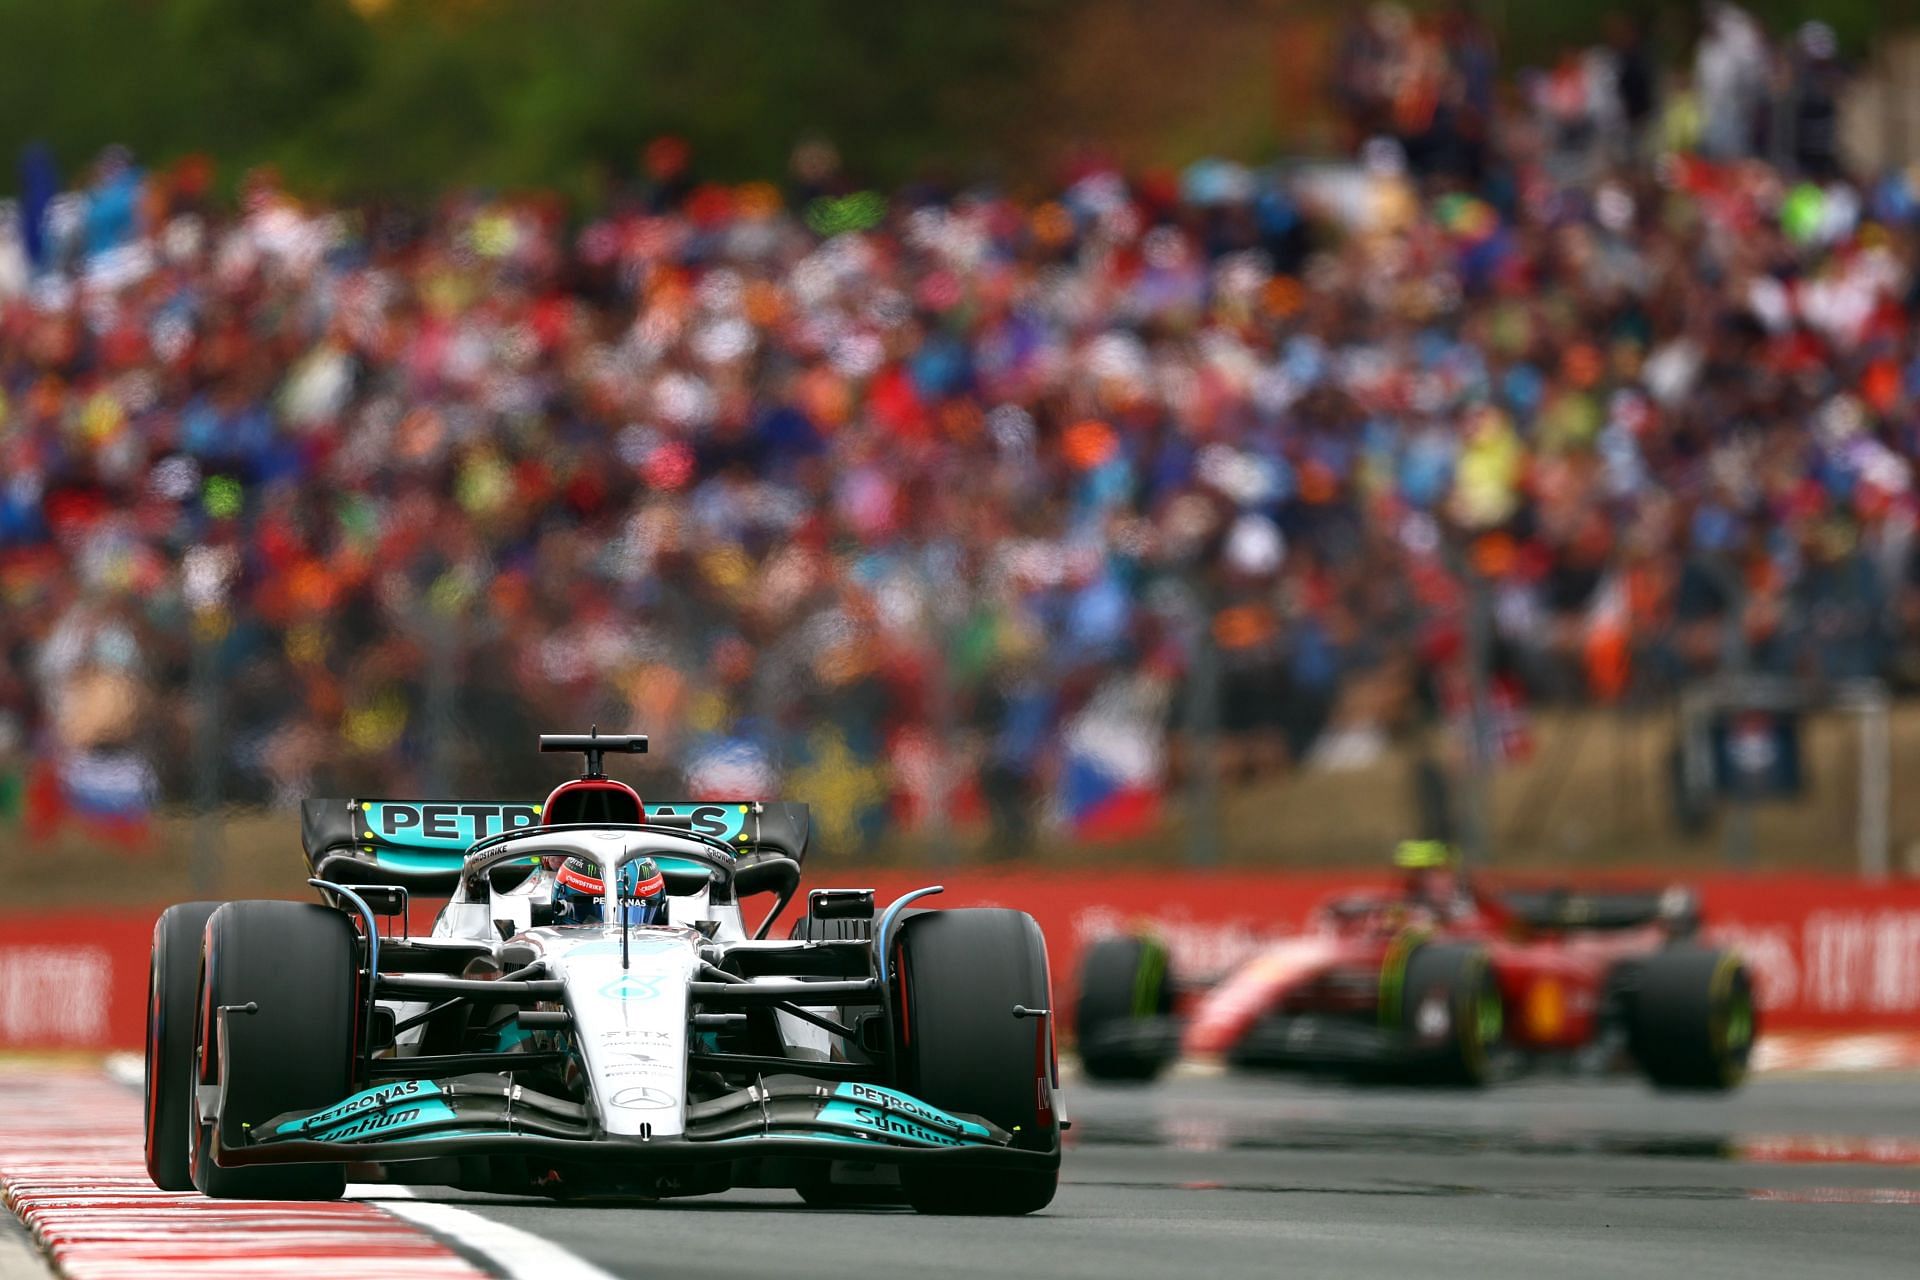 Mercedes&#039; George Russell leads Ferrari&#039;s Carlos Sainz during the F1 Grand Prix of Hungary at Hungaroring on July 31, 2022, in Budapest, Hungary (Photo by Francois Nel/Getty Images)